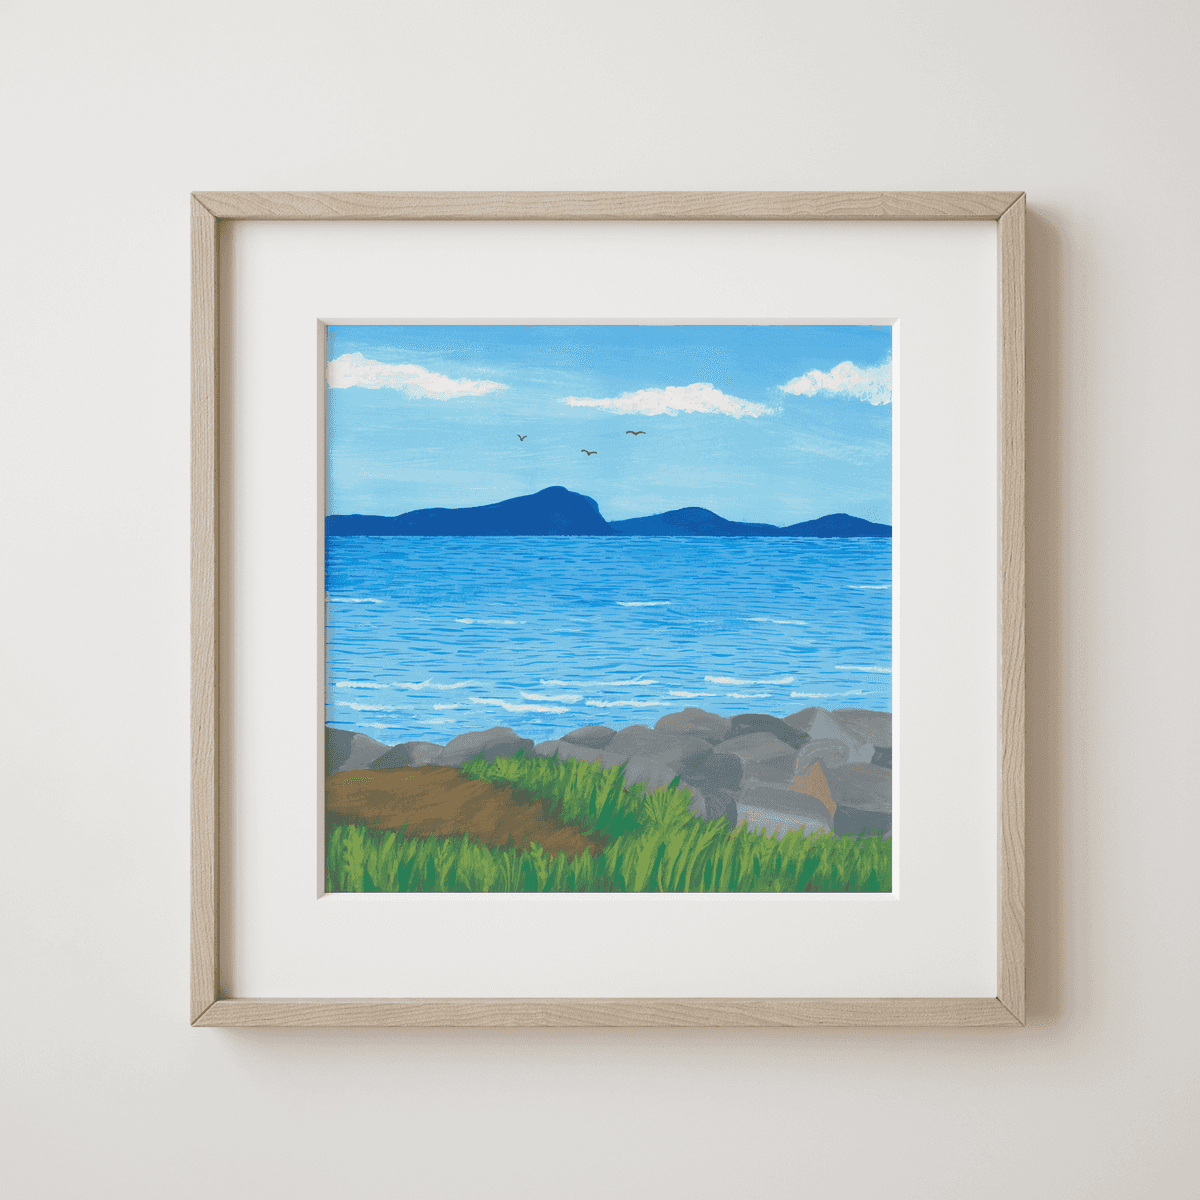 Gentle Ocean Waves on Rocks - Seaside Calm with Distant Hills and Flying Birds Fine Art Print - nature soundscape art - earth.fm